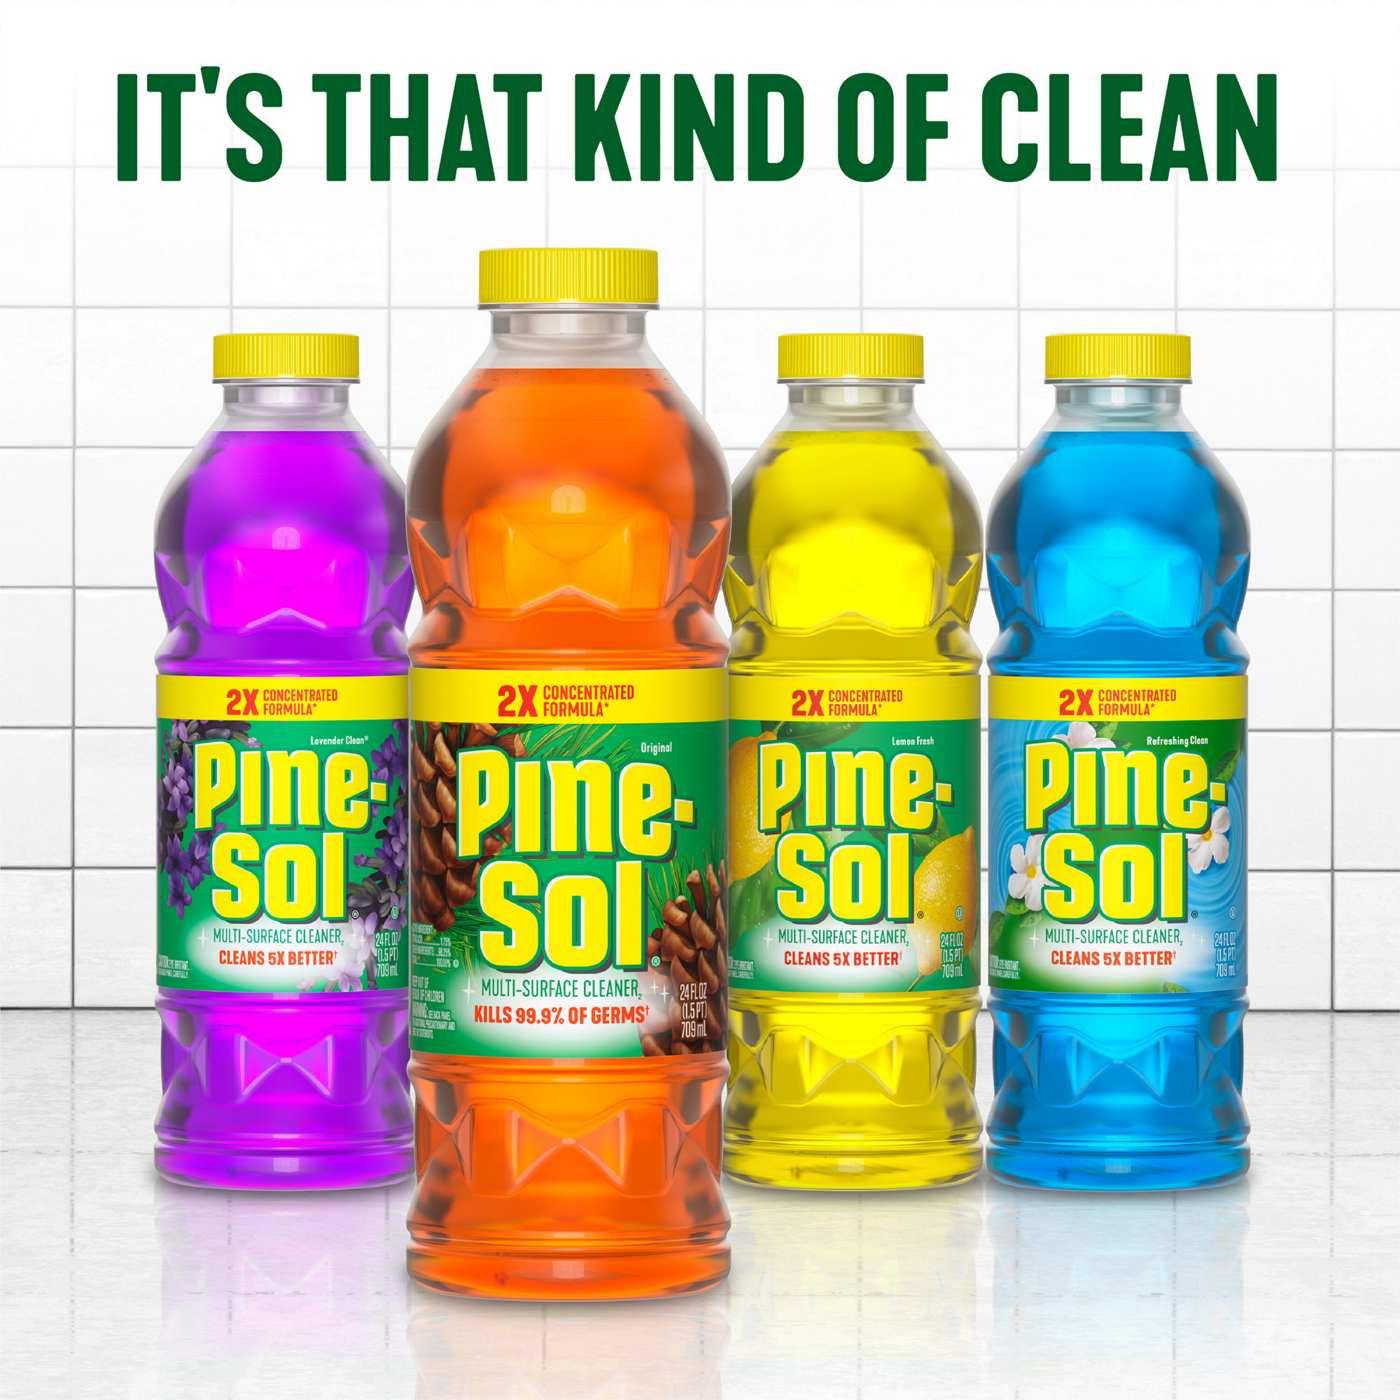 Pine-Sol Lavender Clean Multi-Surface Cleaner; image 9 of 9